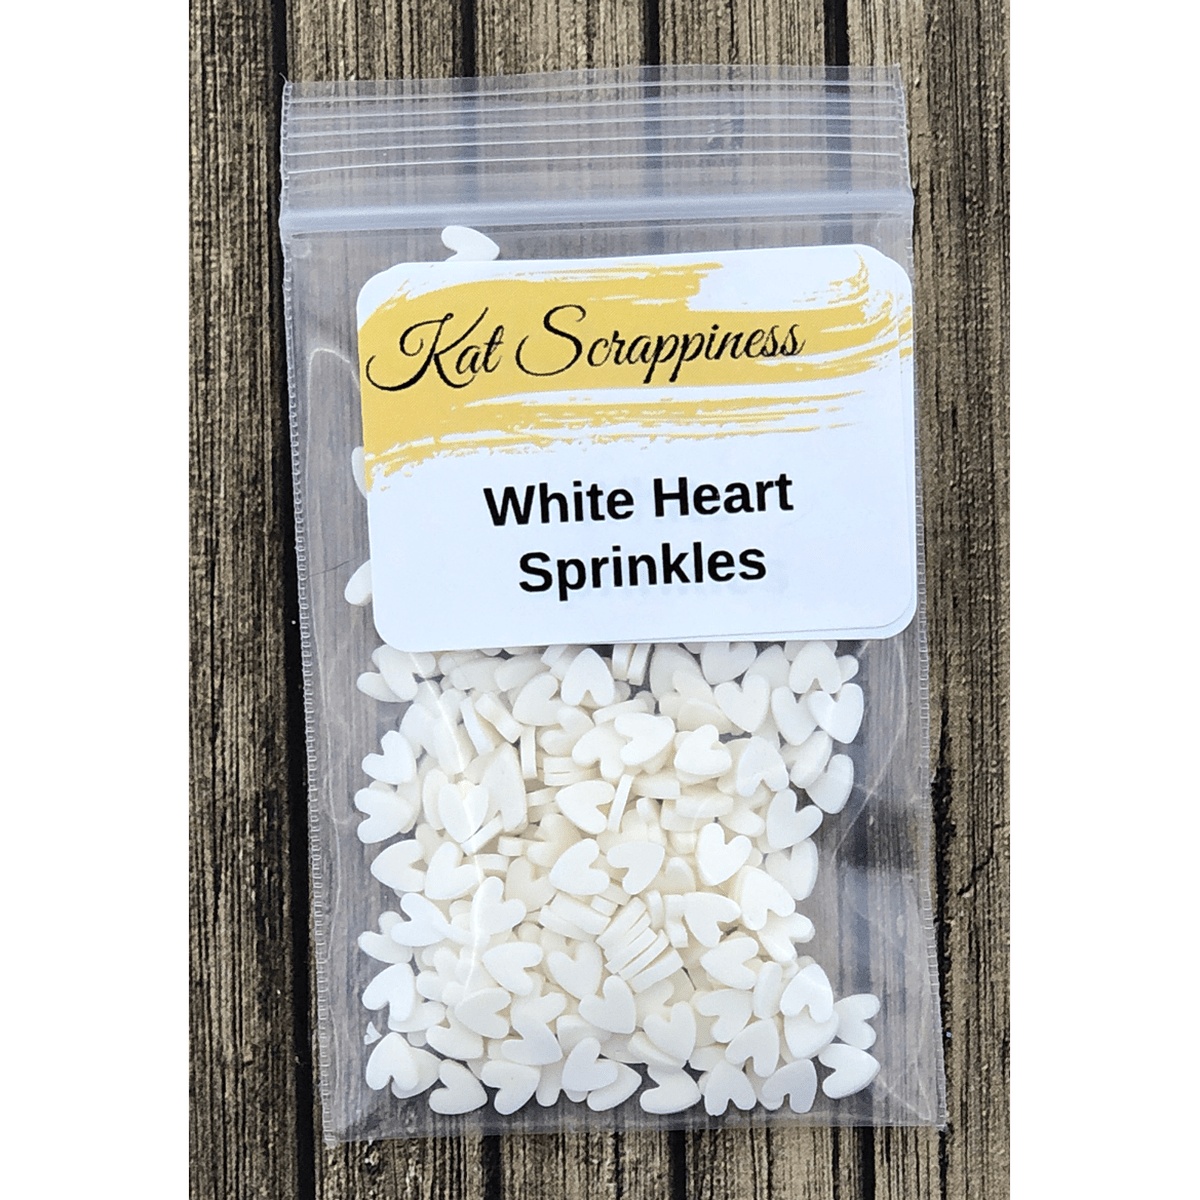 White Hearts Sprinkles (Small) by Kat Scrappiness - Kat Scrappiness